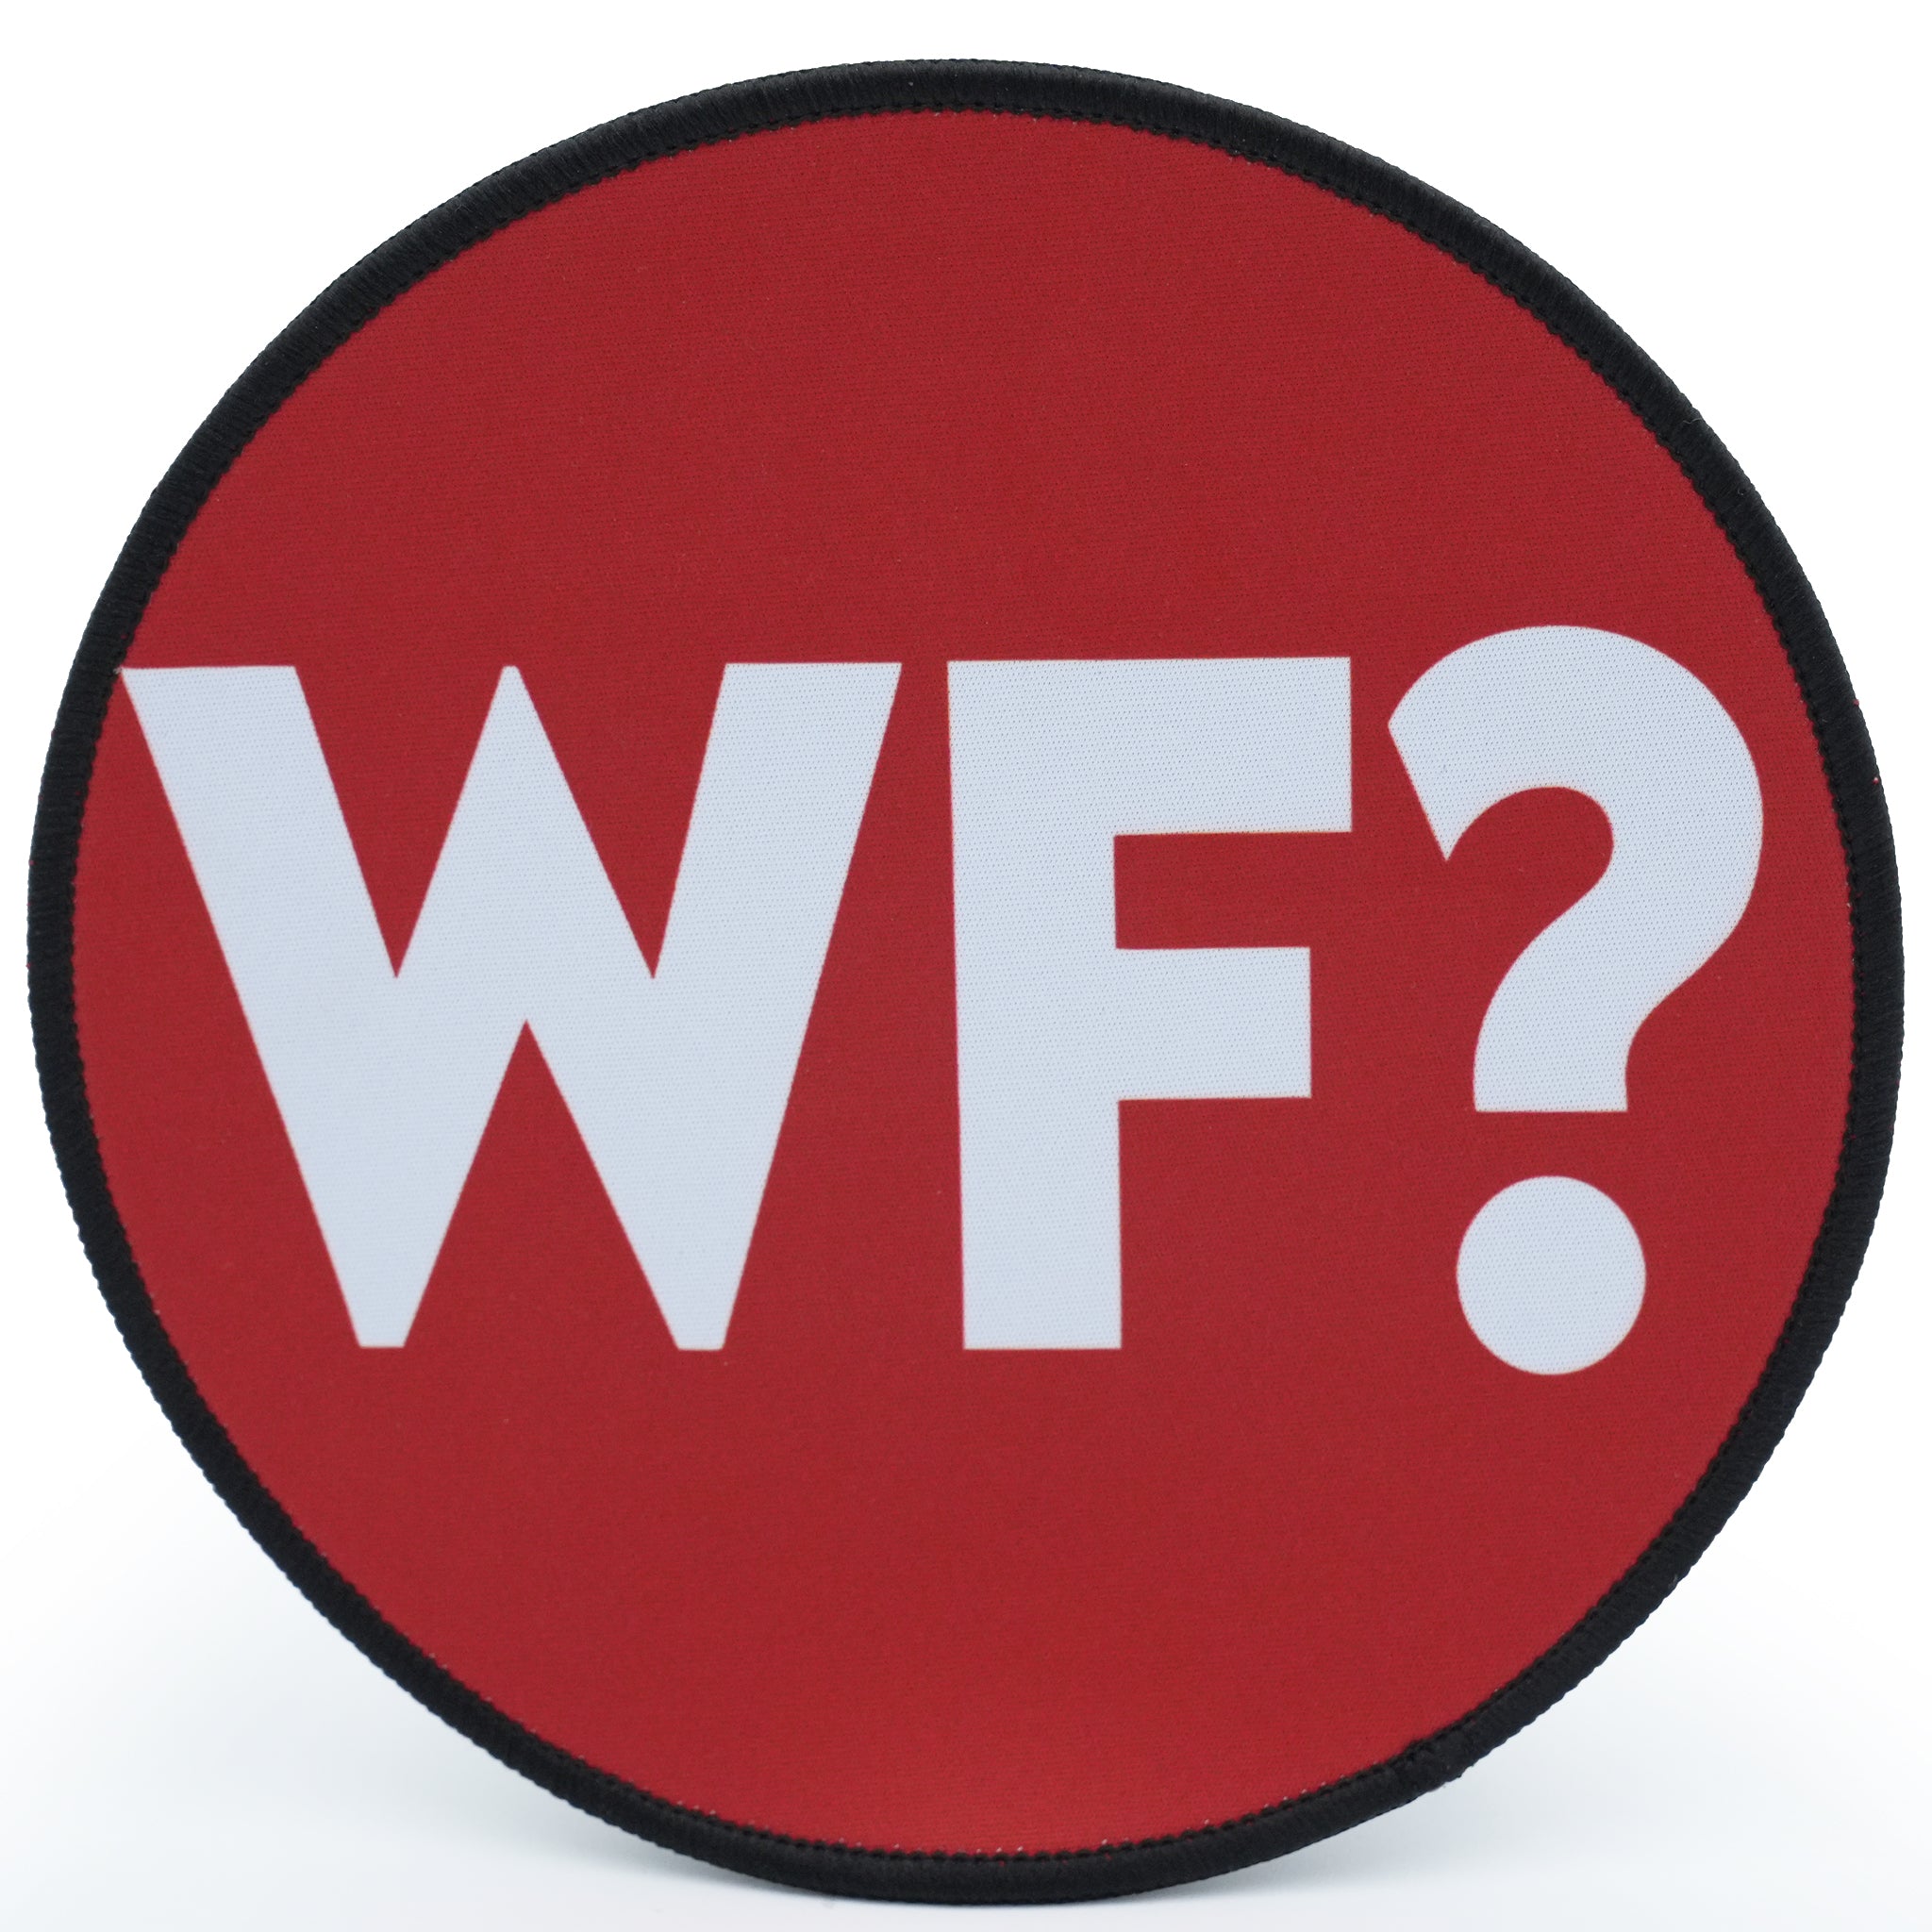 Why Files Logo Mouse Pad